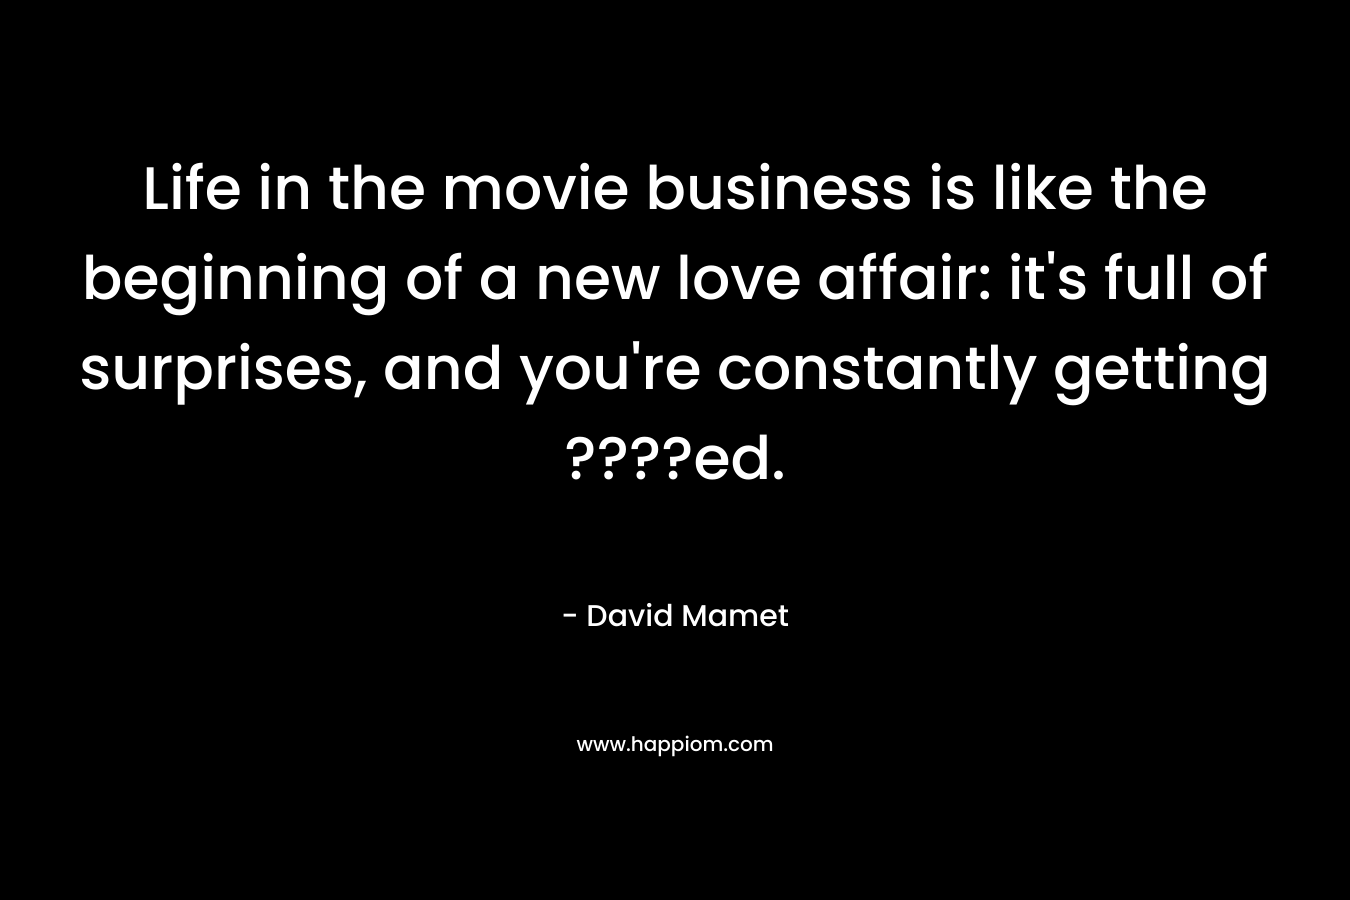 Life in the movie business is like the beginning of a new love affair: it's full of surprises, and you're constantly getting ????ed.